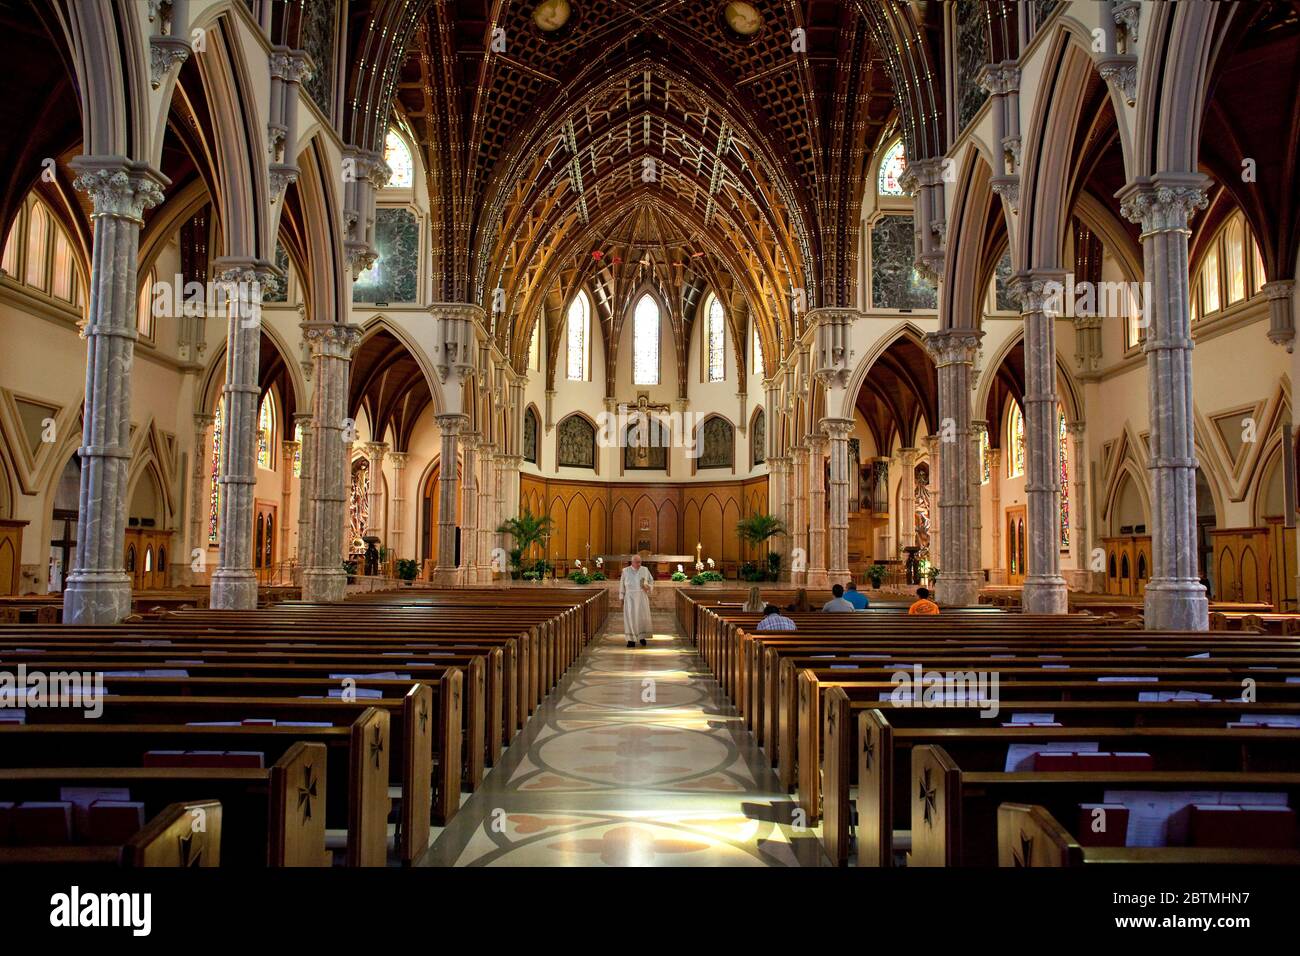 Horizontal view of the catholic Holy Name Cathedral interior with the priest walking along the central aisle, Chicago, Illinois, USA Stock Photo